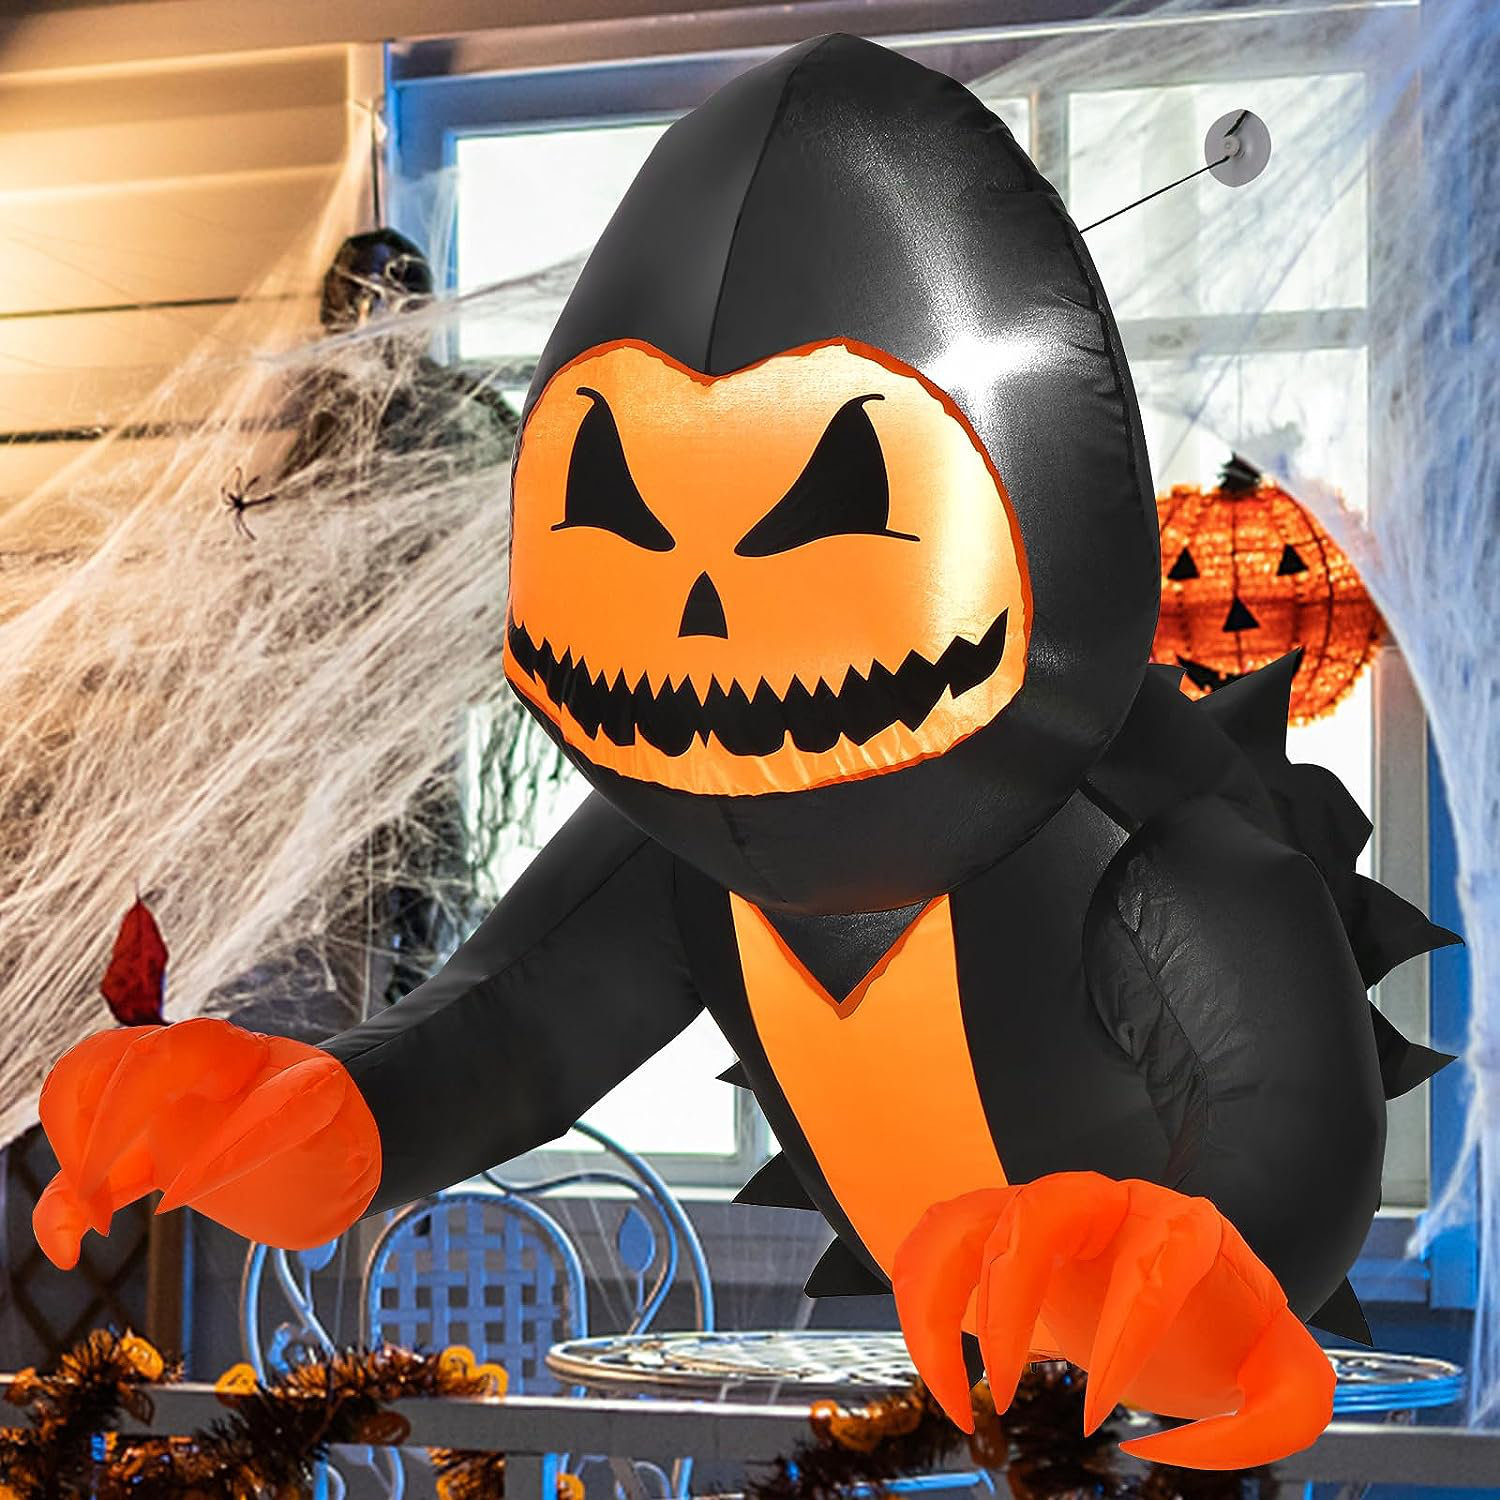 The Holiday Aisle® 3.3 FT Halloween Inflatable Pumpkin Head Ghost